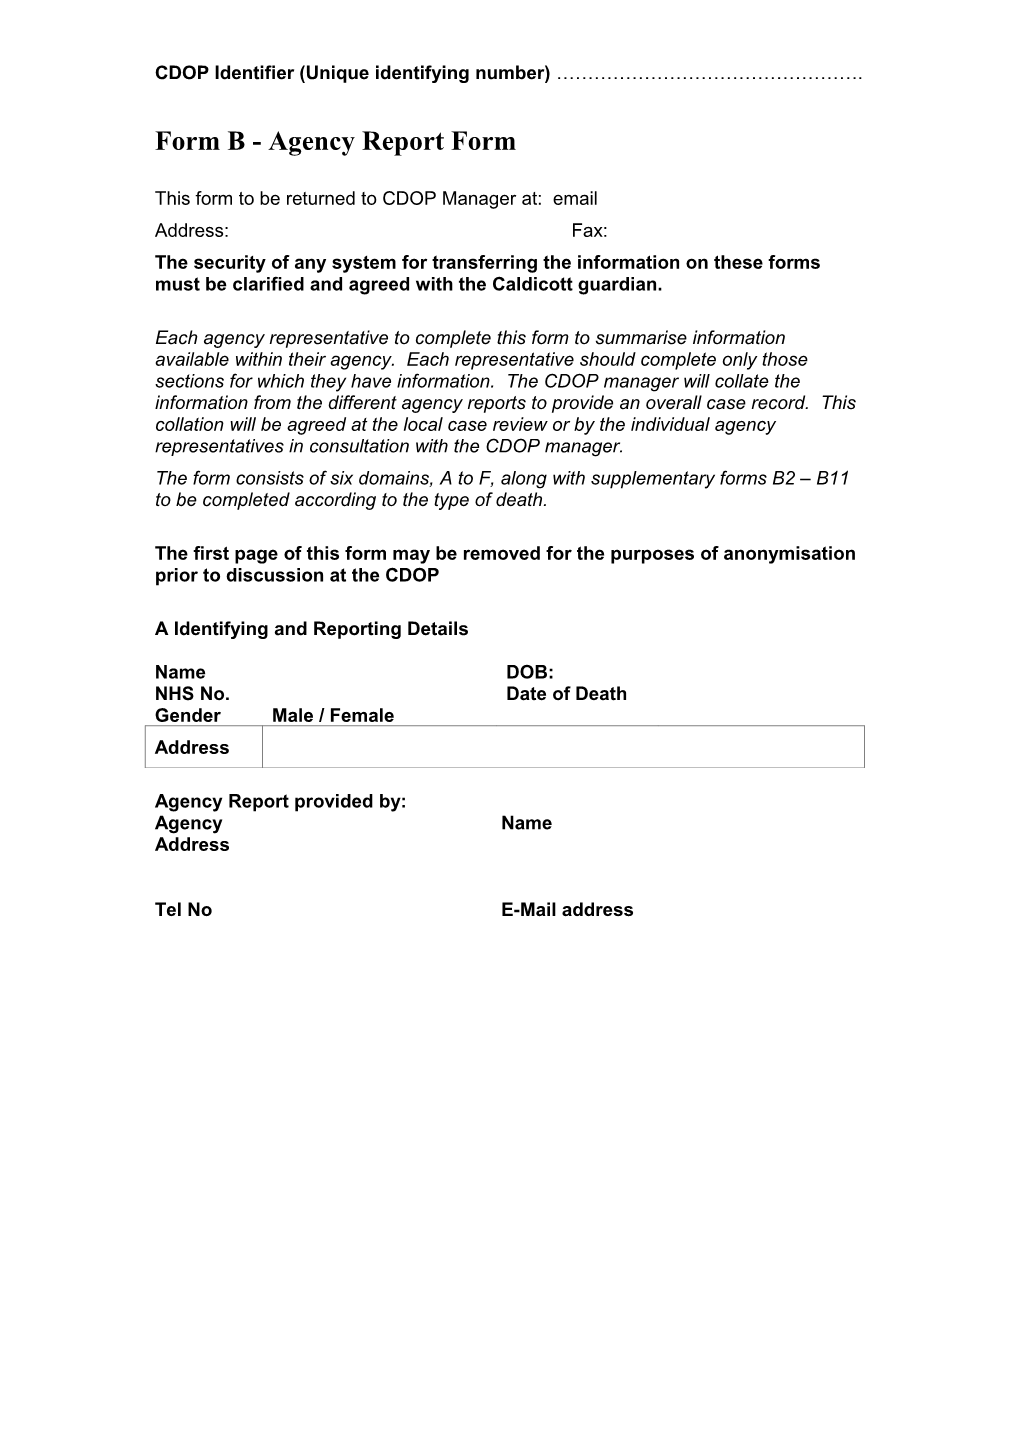 Form B Agency Report Form